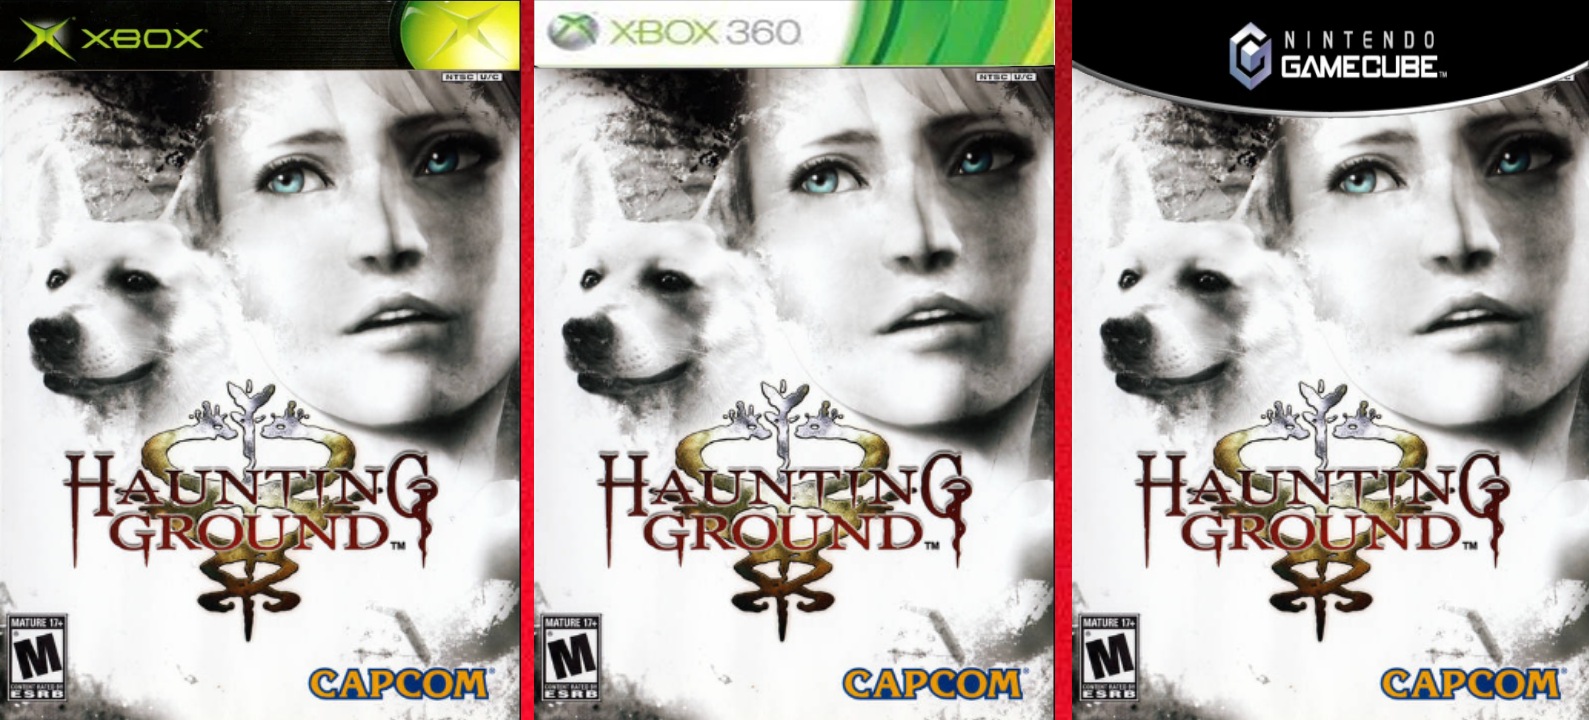 Haunting Ground XBOX, Xbox 360 and GameCube Covers by RuthlessGuide1468 ...